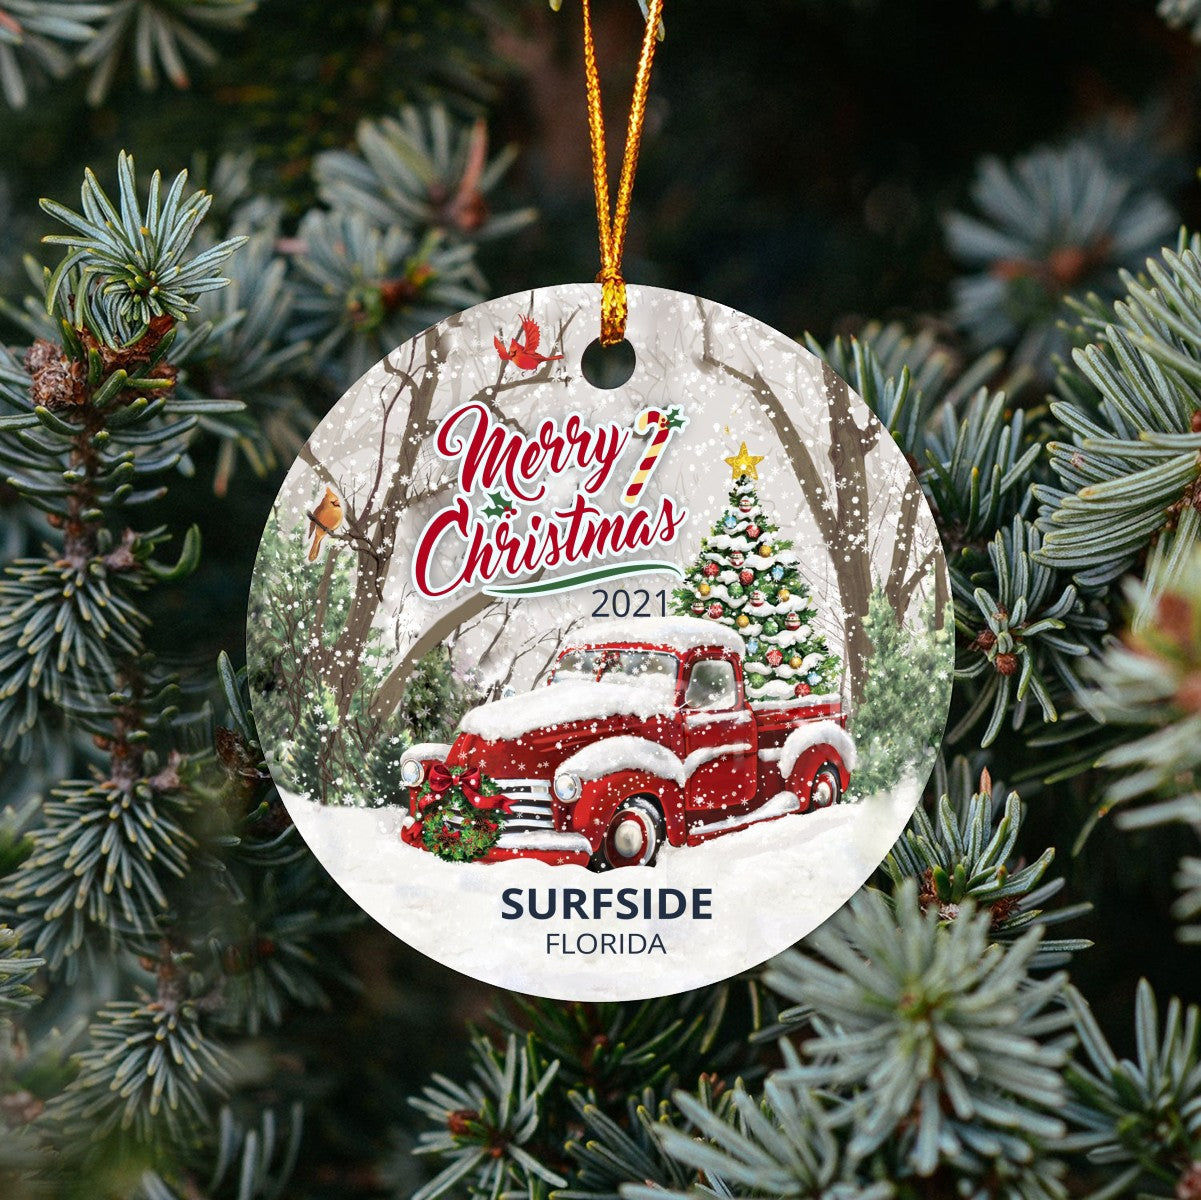 Christmas Tree Ornaments Surfside - Ornament With Name City, State Surfside Florida FL Ornament - Red Truck Xmas Ornaments 3'' Plastic Gift For Family, Friend And Housewarming